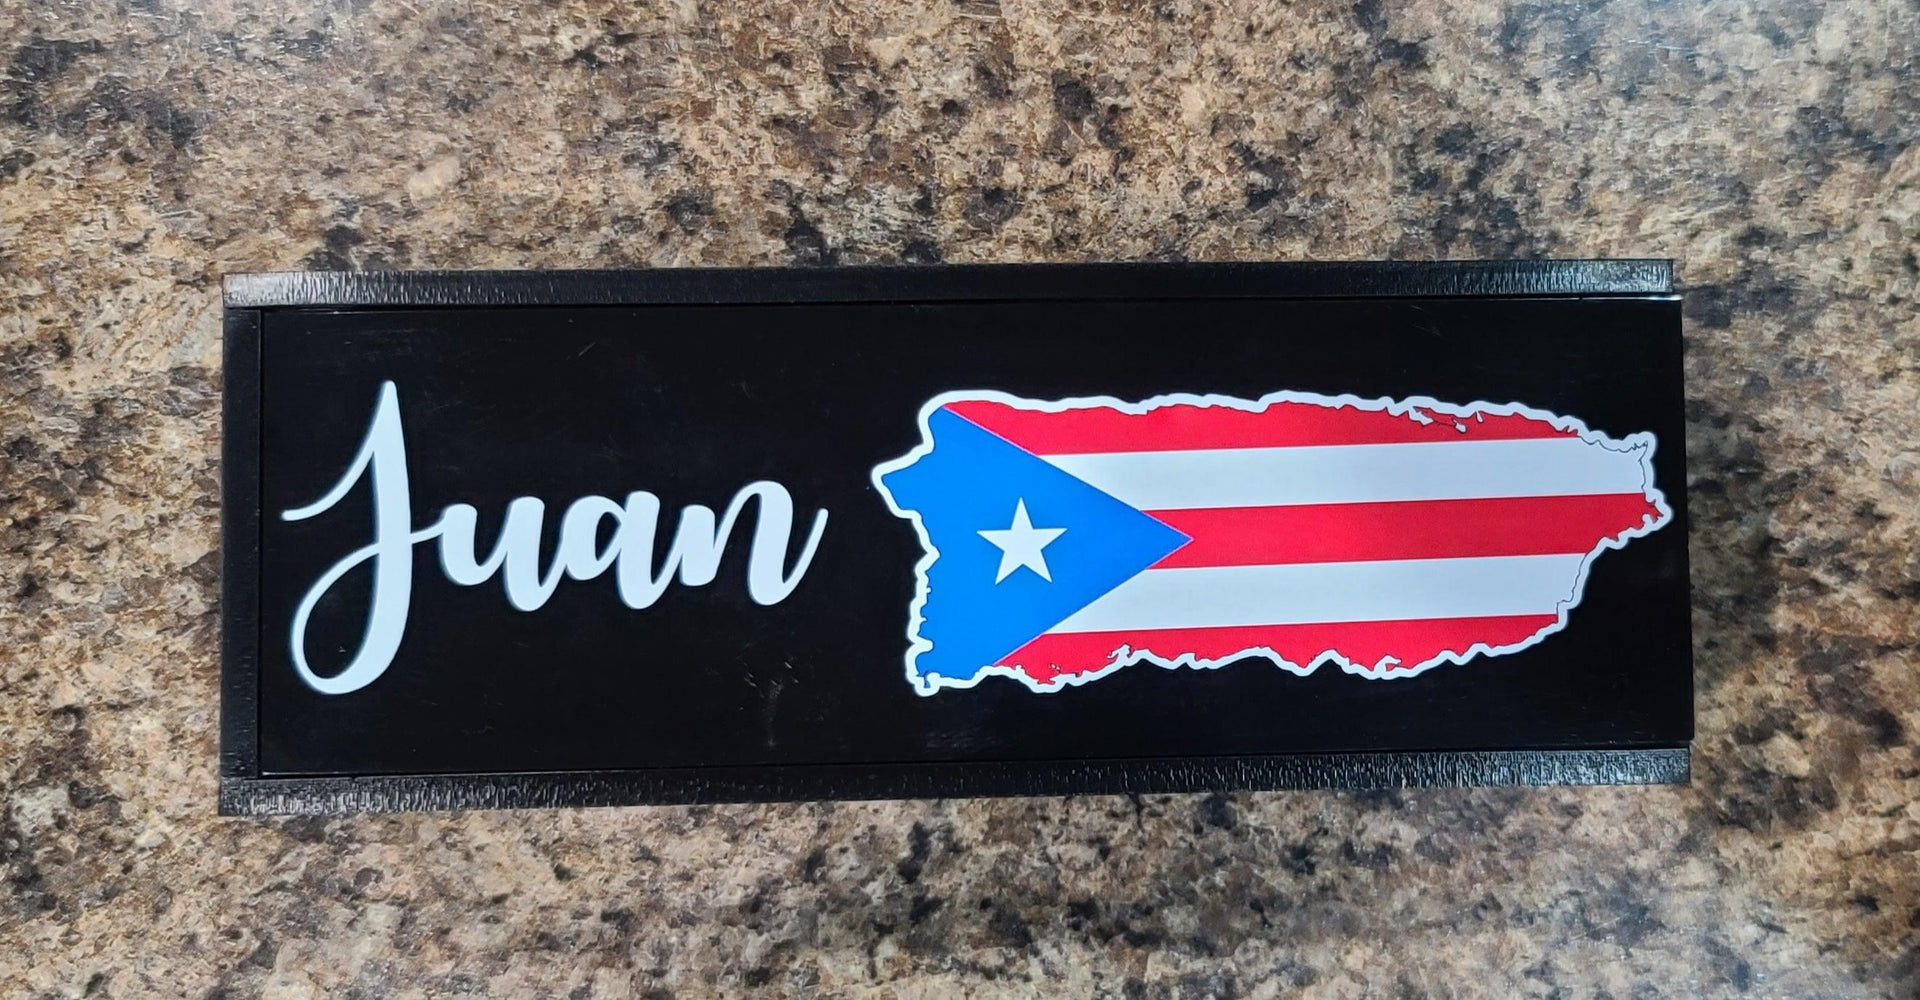 PUERTO RICO Domino Set 28 Map and Flag, Customized, Handmade Resin, dominoes for gift